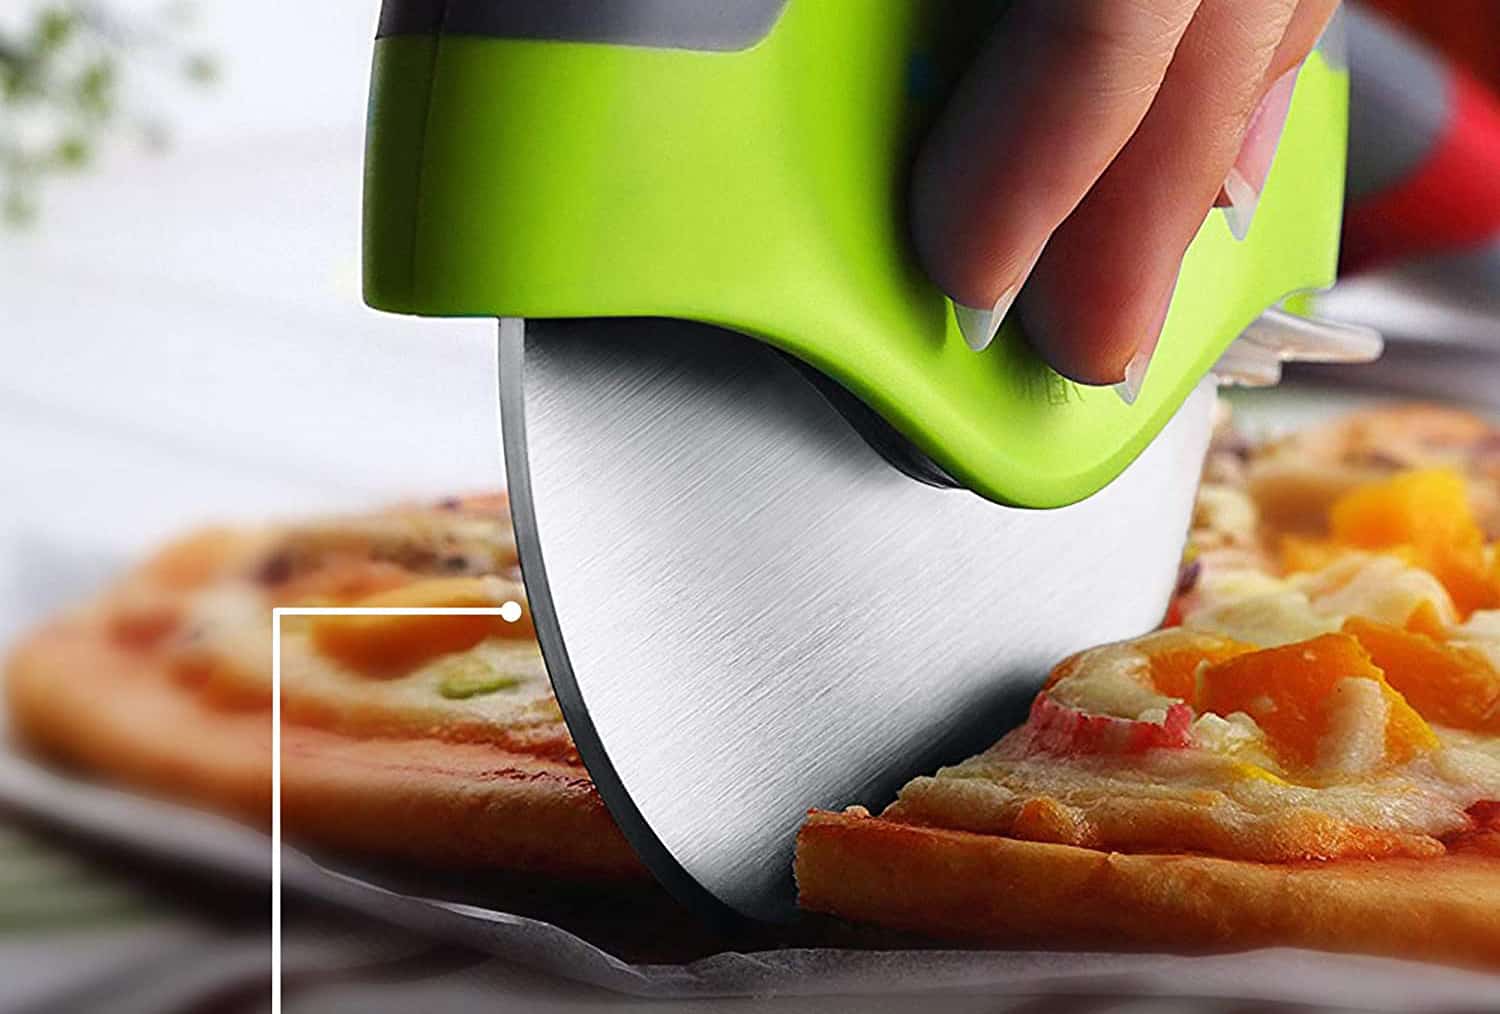 Top 10 Best Pizza Cutters in 2020 Reviews Show Guide Me